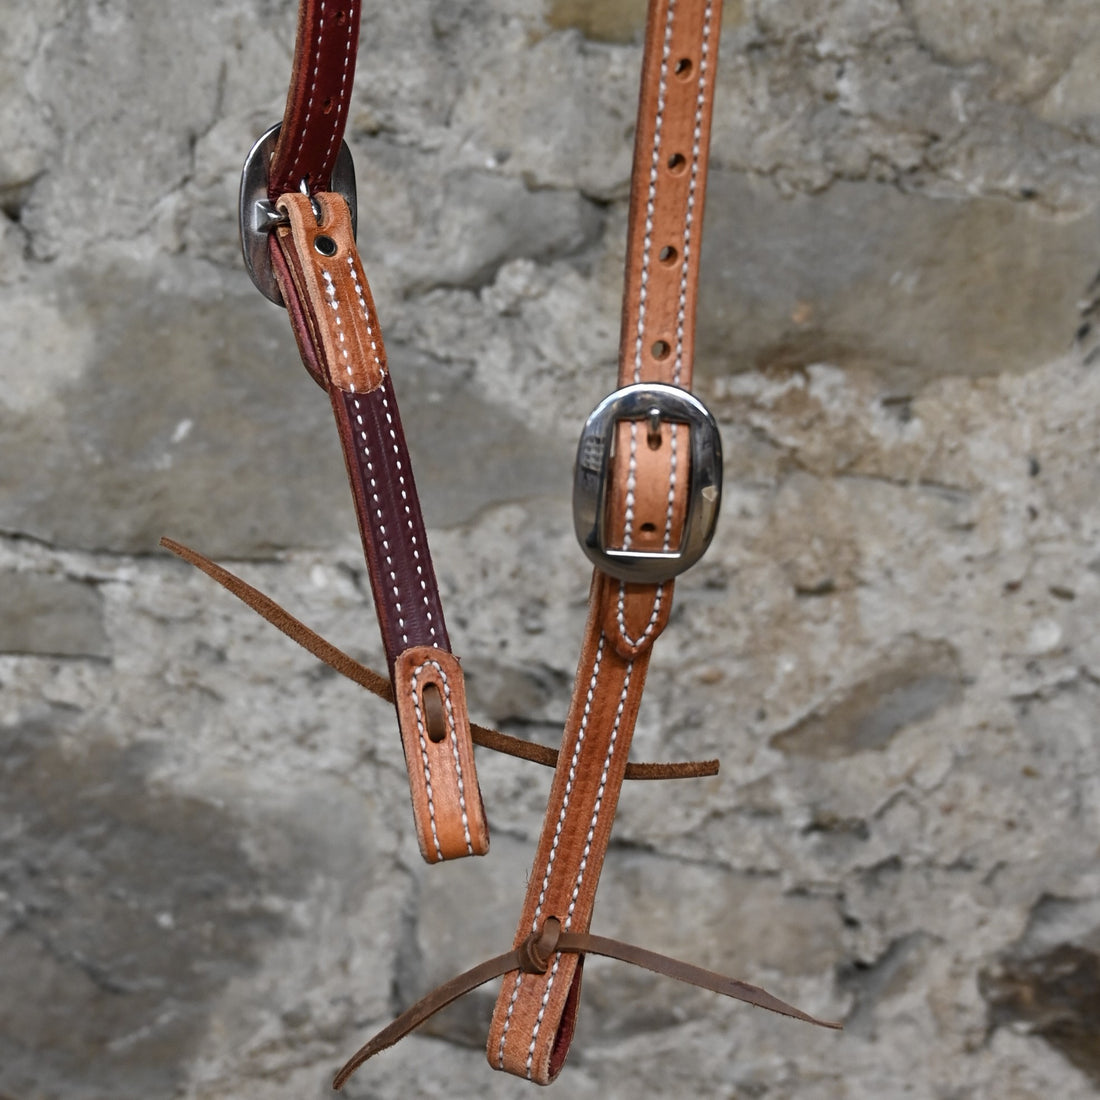 Berlin Custom Leather Double Stitched Sliding Ear Headstall view of buckles